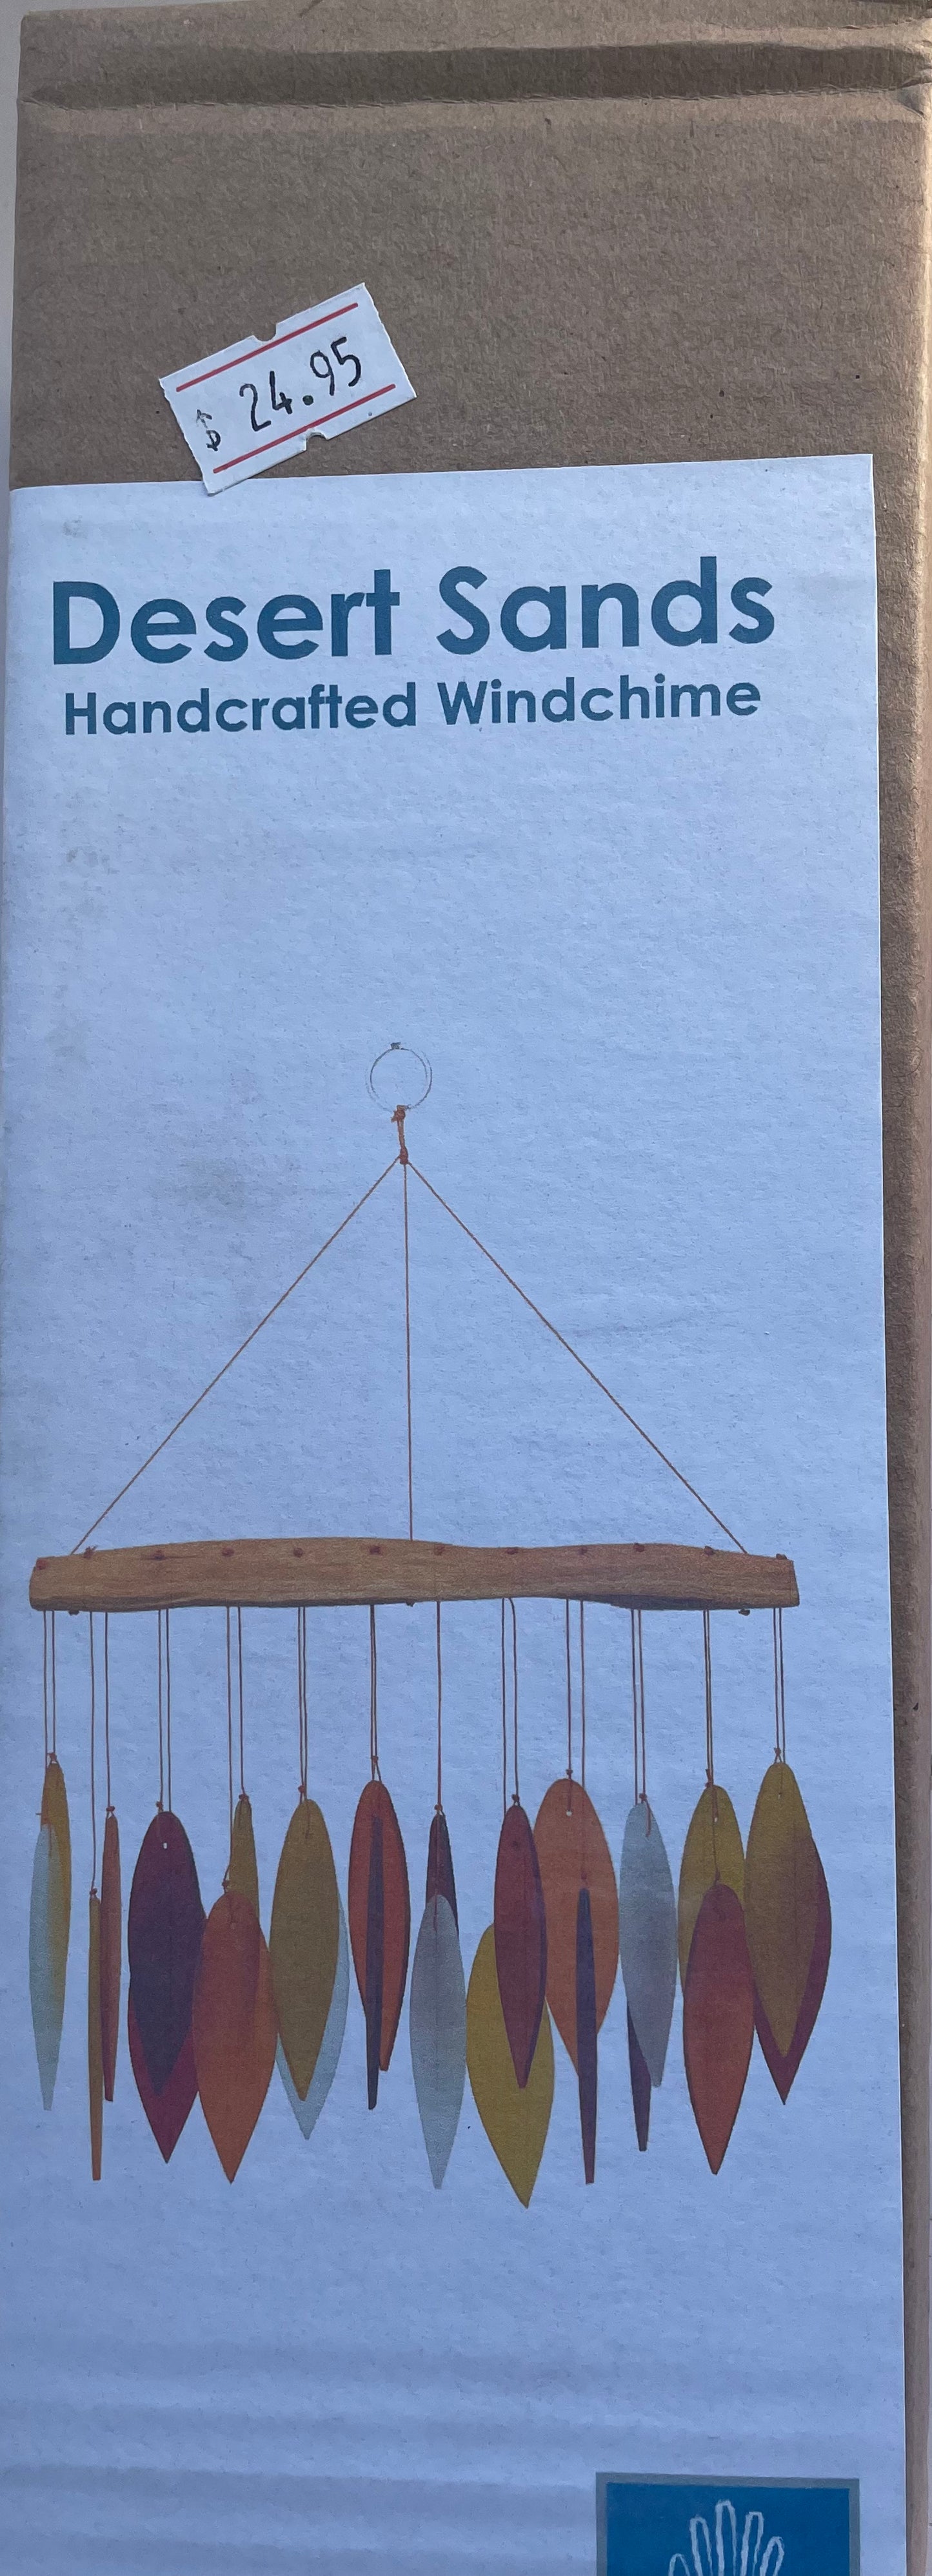 Desert Sands Driftwood and Glass Wind Chime